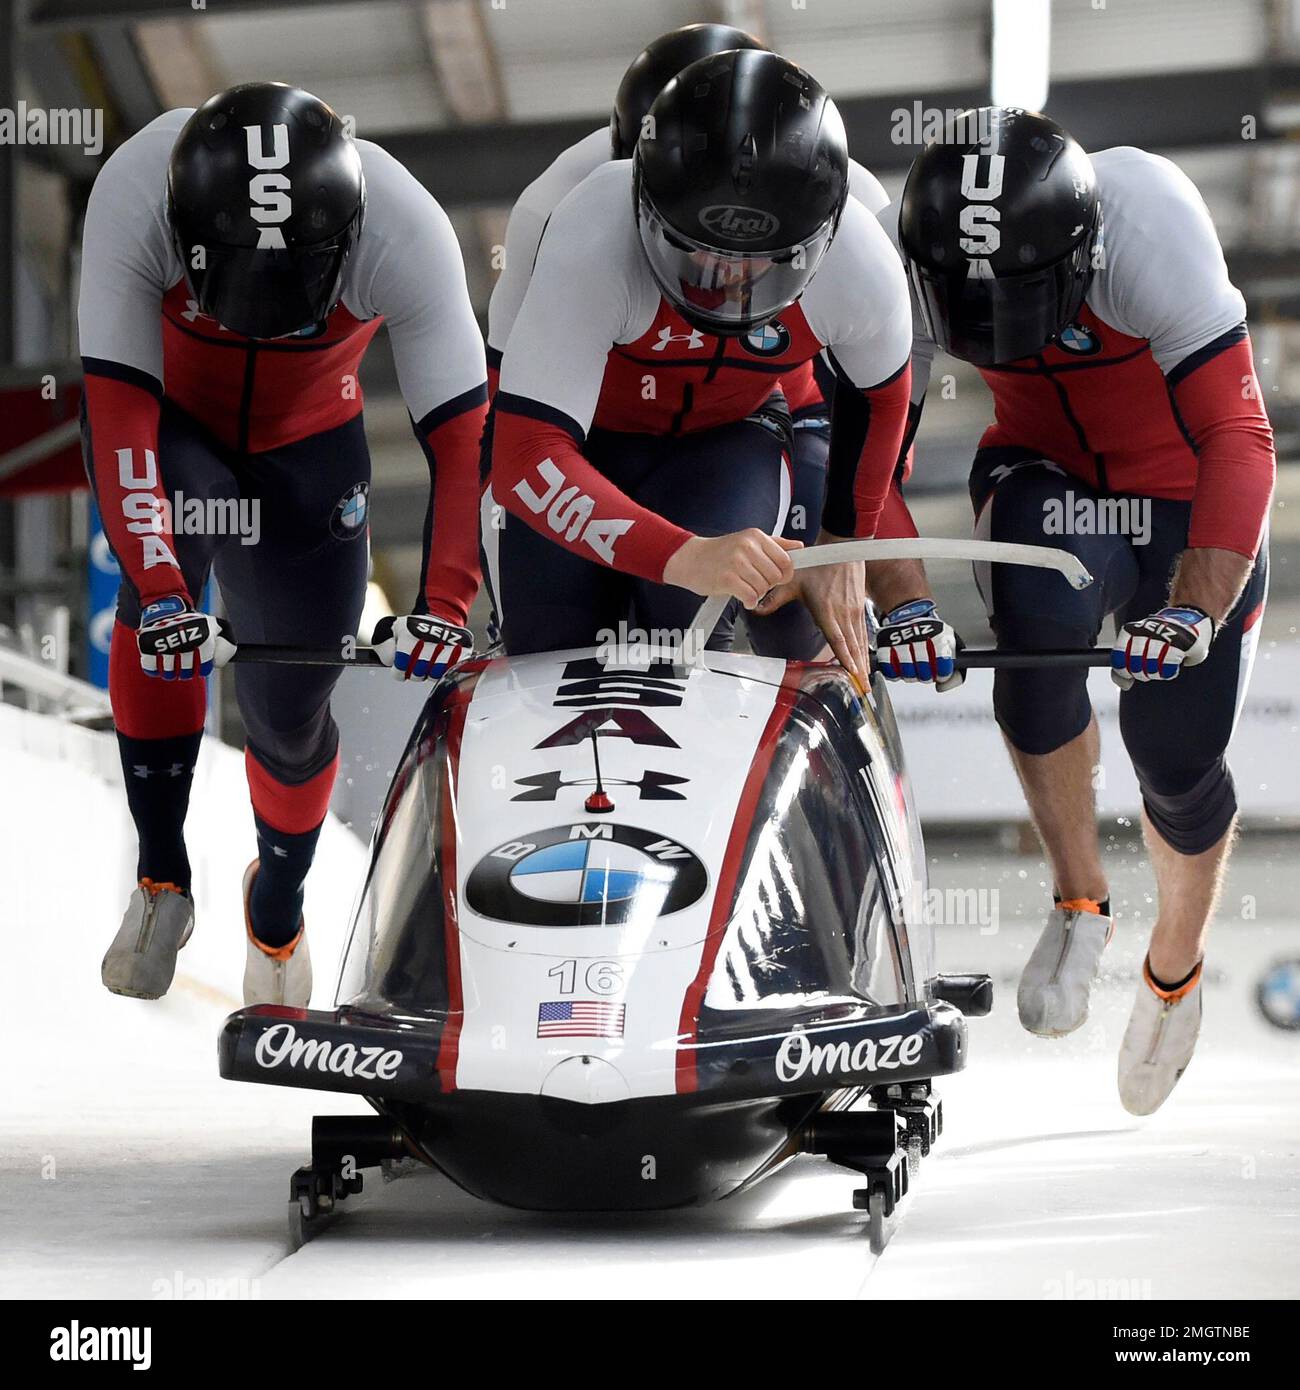 Team Hunter Church, Joshua Williamson, James Reed and Kristopher Horn of the United States start during the four-man bobsled first race at the Bobsleigh and Skeleton World Championships in Altenberg, eastern Germany,